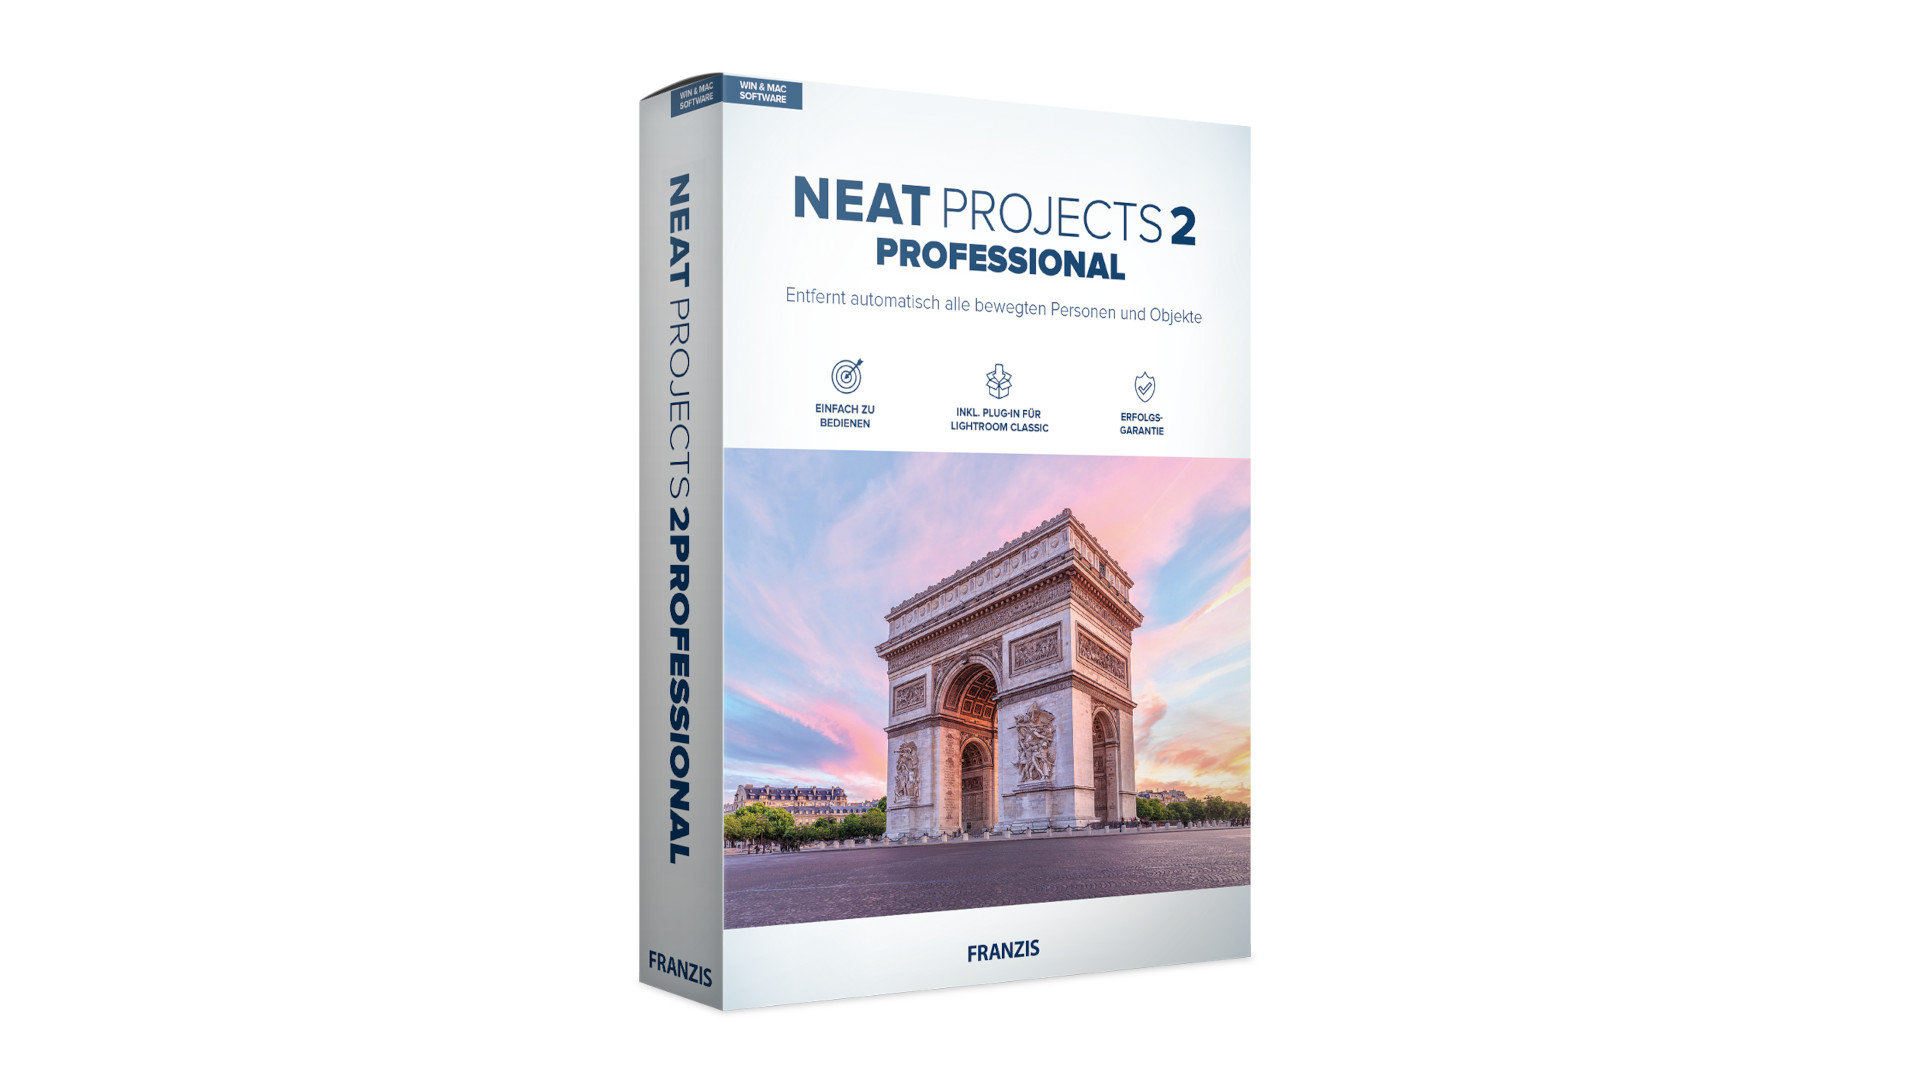 NEAT projects 2 Pro - Project Software Key (Lifetime / 1 PC) 33.89 usd